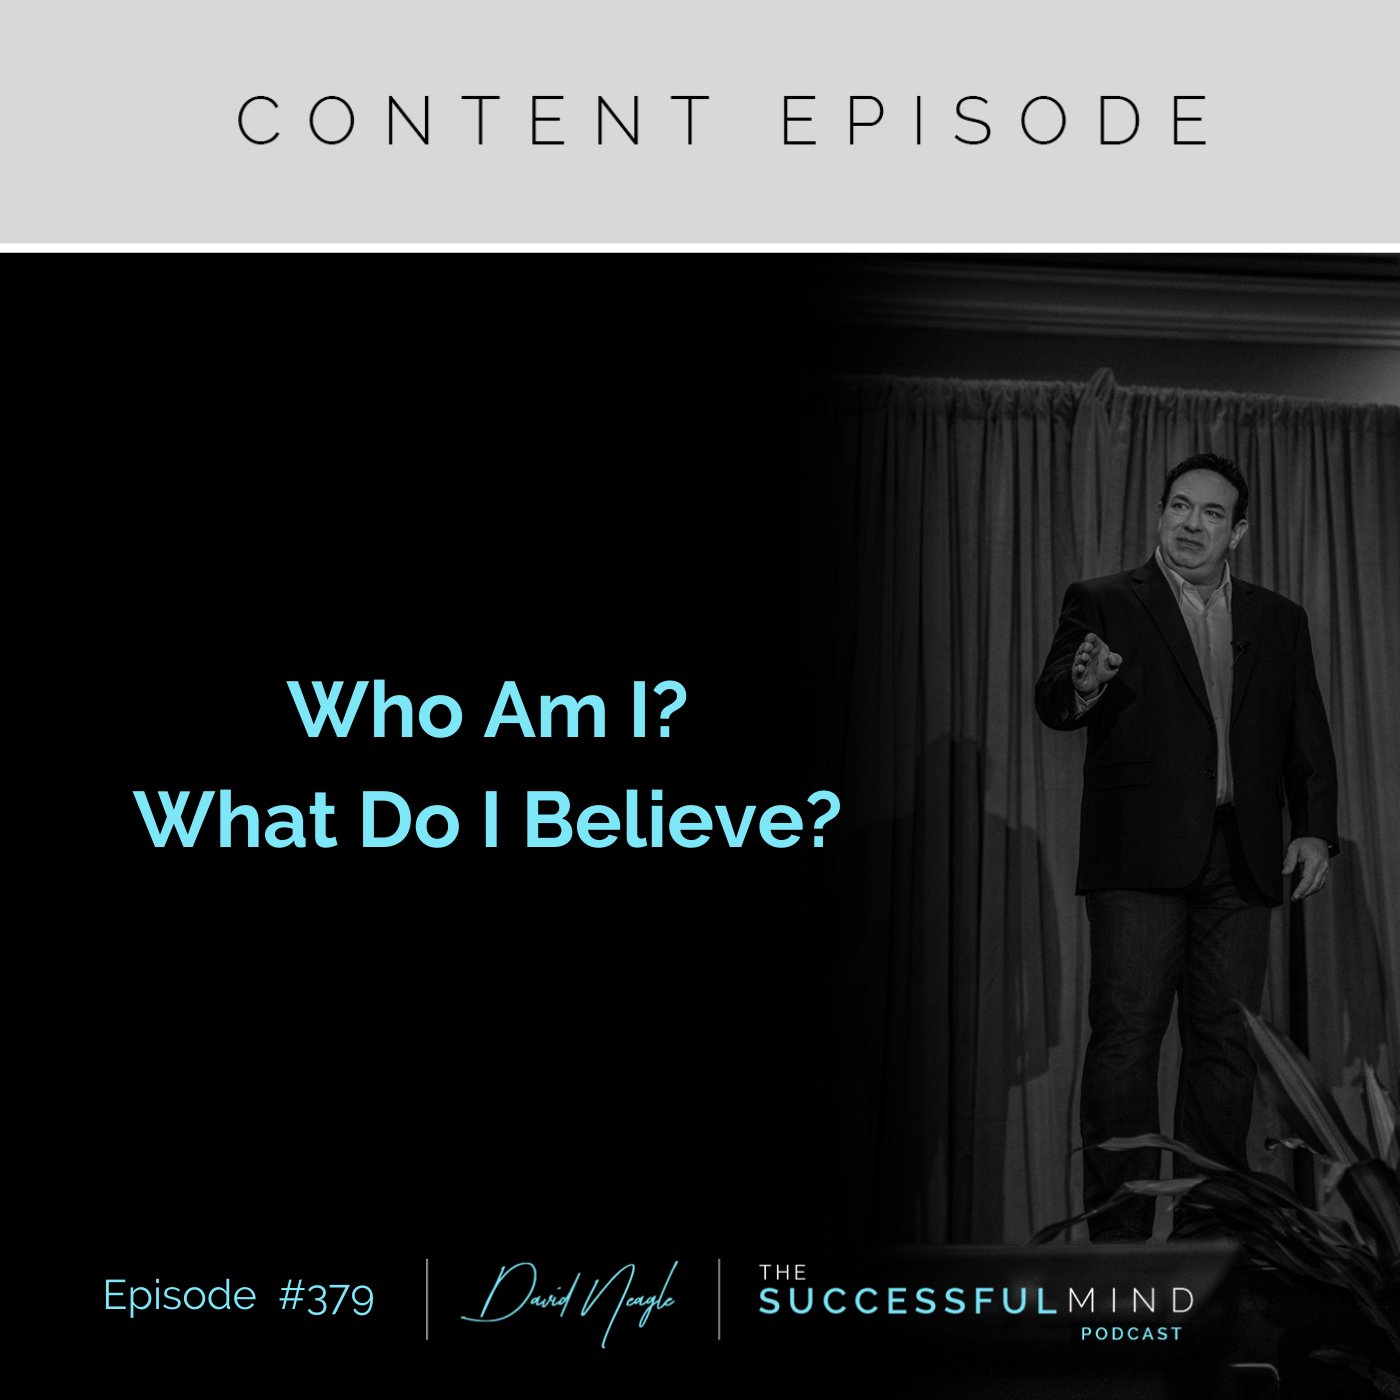 The Successful Mind Podcast - Episode 379 - Who Am I? What Do I Believe?